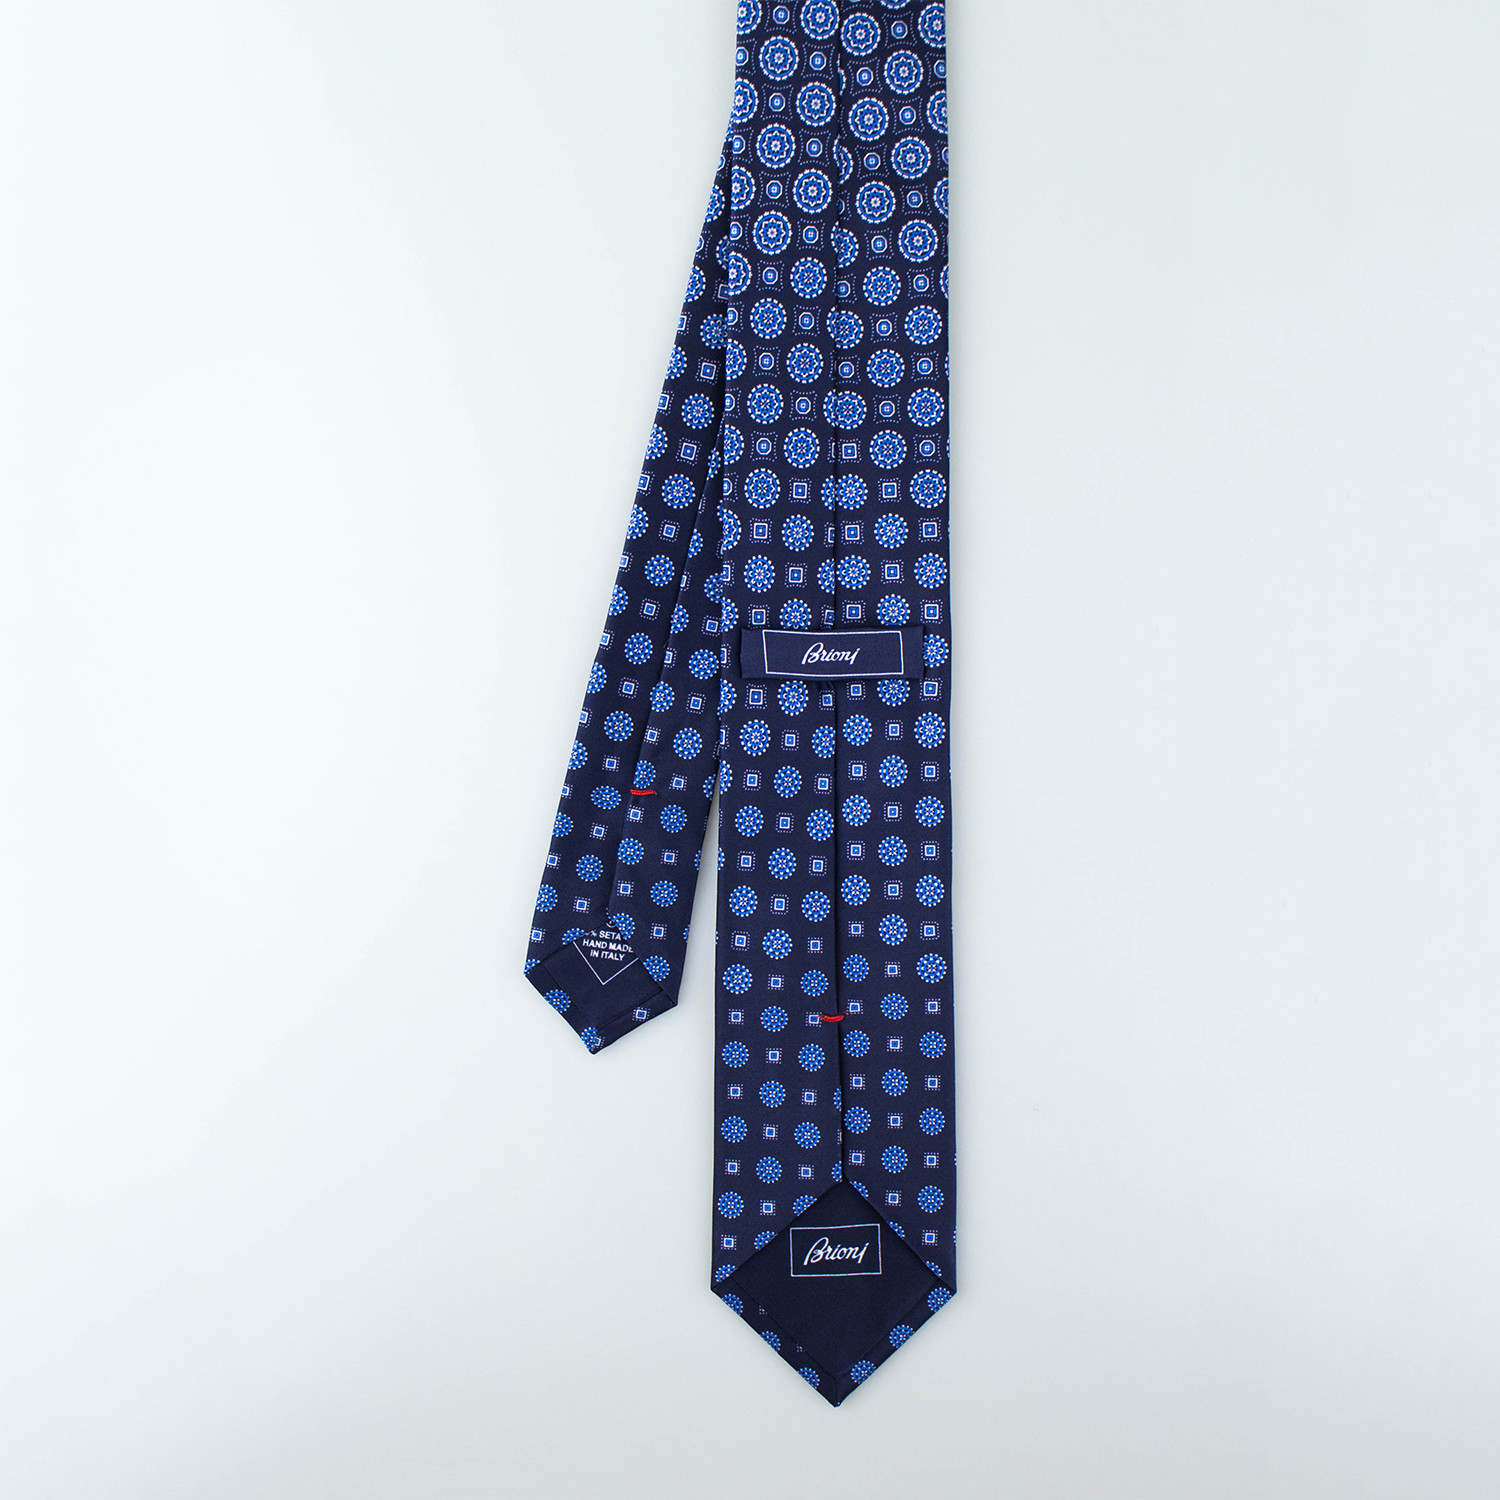 Brioni // Lathan Tie // Blue - Tom Ford and Brioni - Touch of Modern